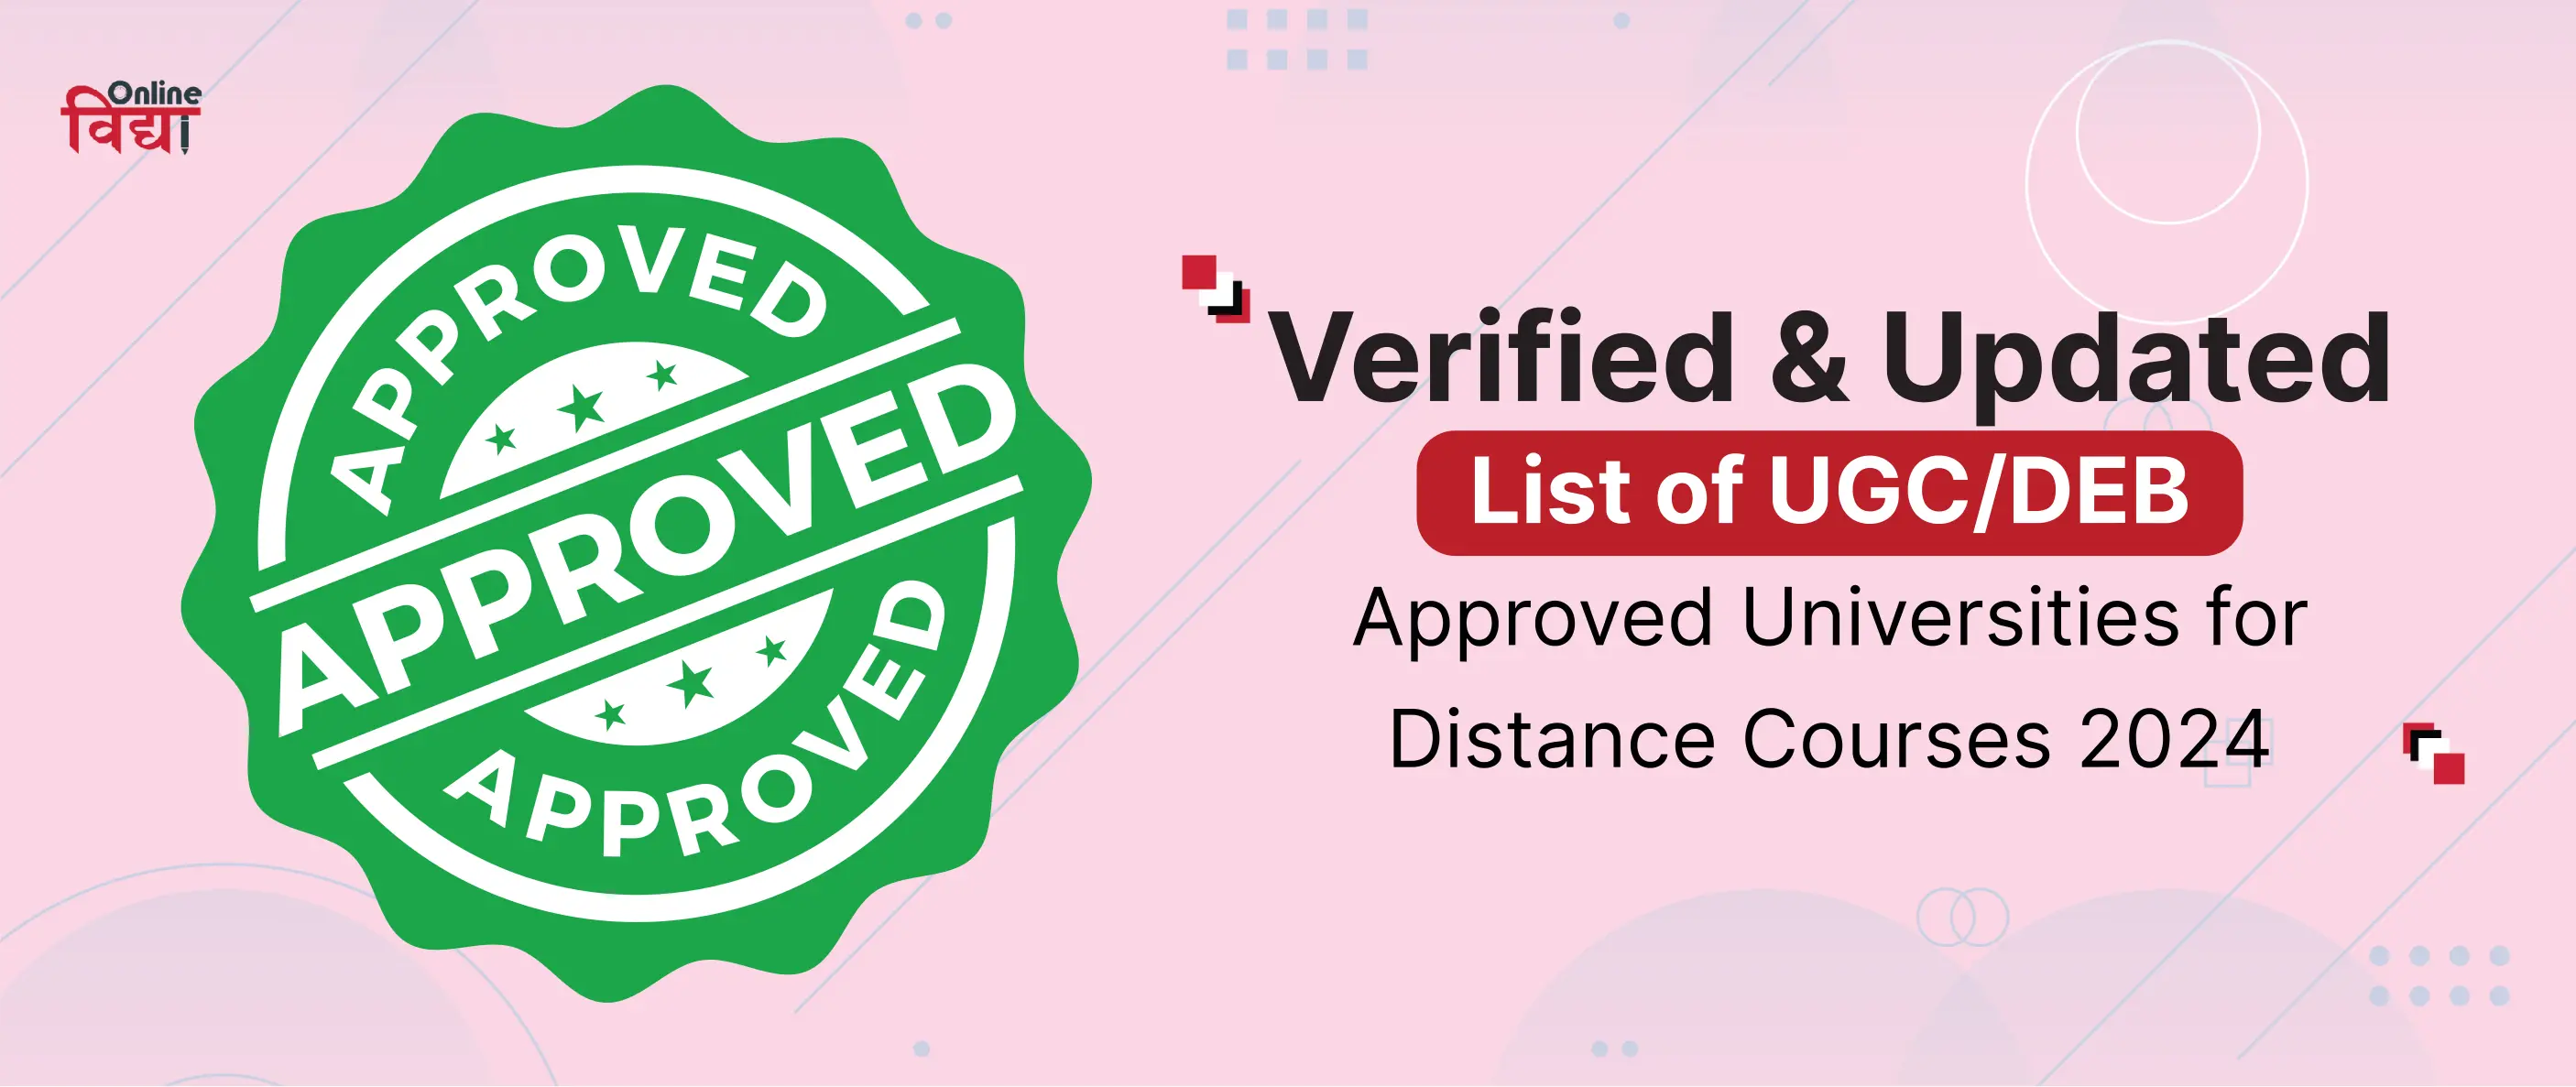 Verified & Updated List of UGC/DEB Approved Universities for Distance Courses 2024